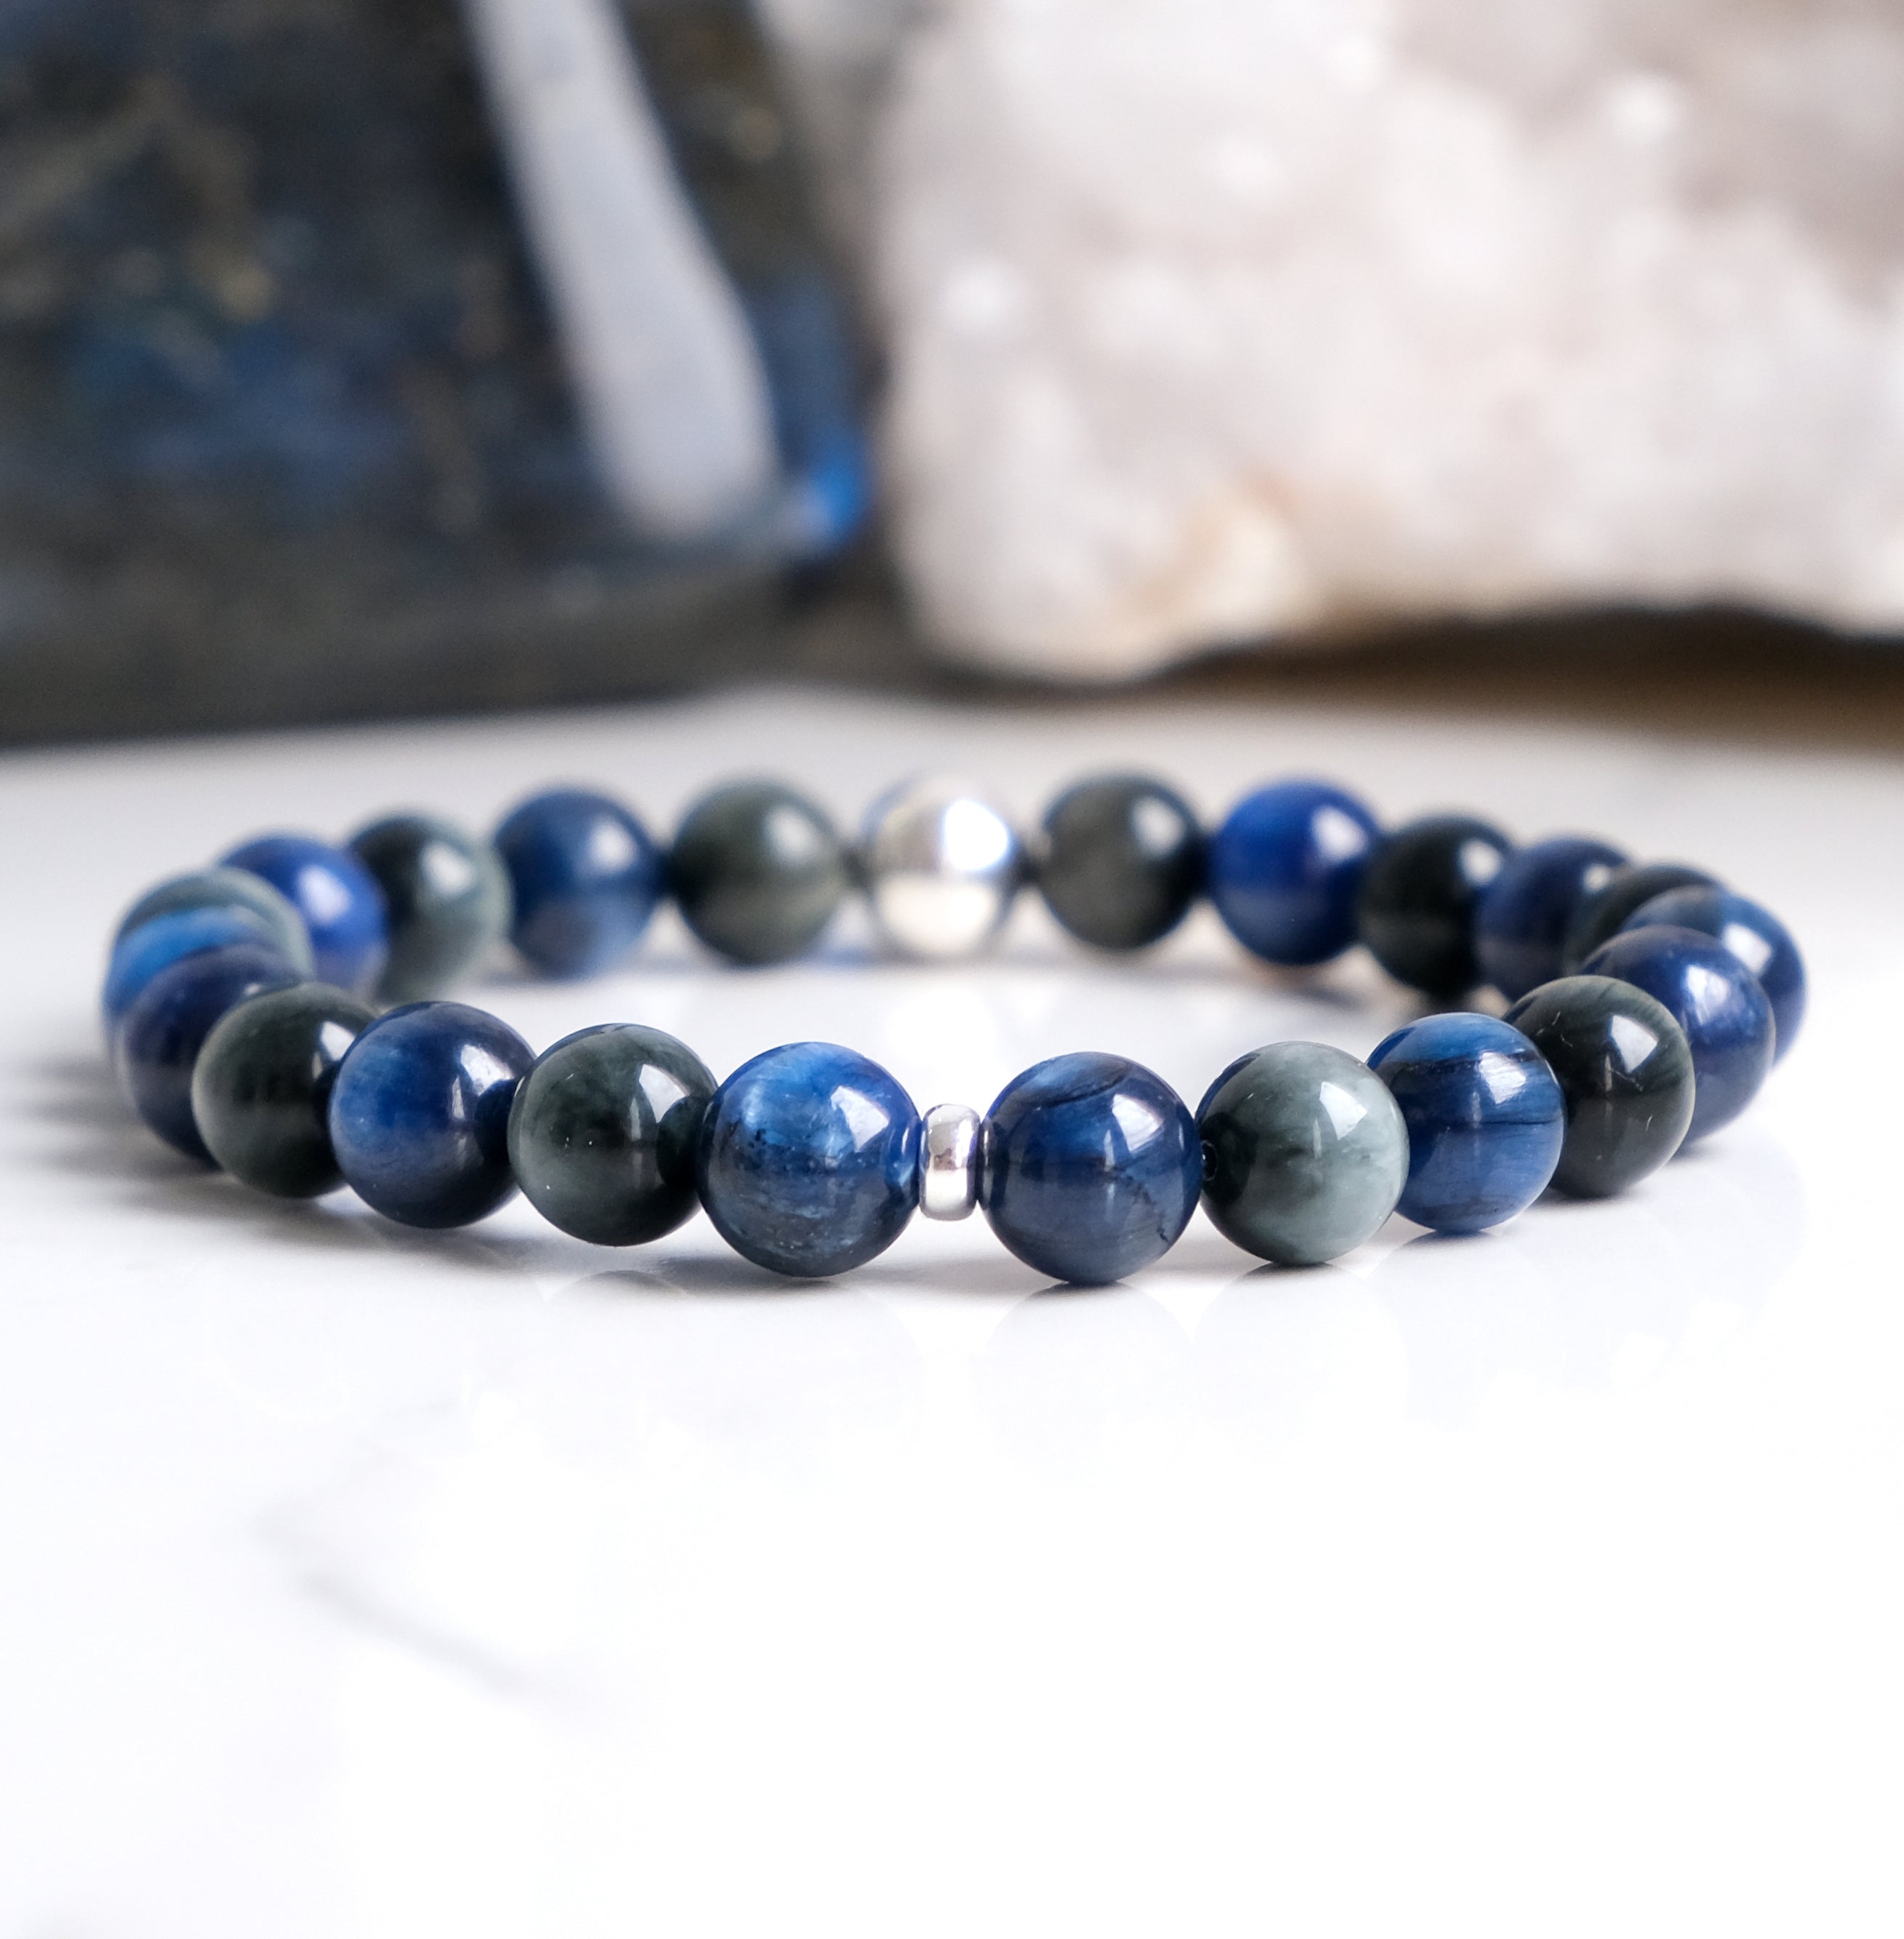 Kyanite and eagle eye gemstone bracelet with silver accessories